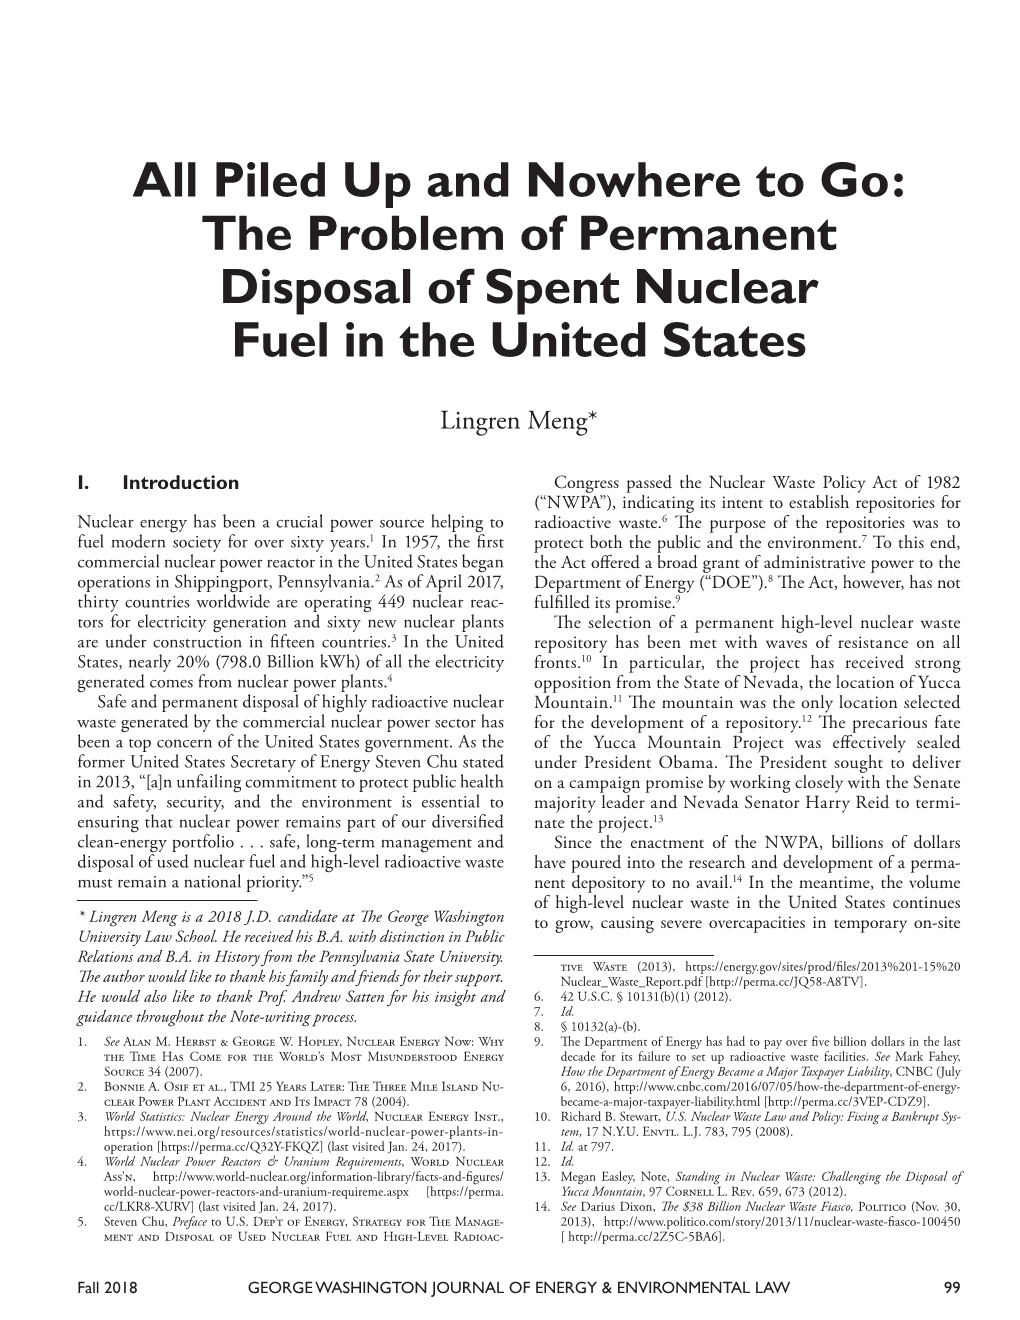 The Problem of Permanent Disposal of Spent Nuclear Fuel in the United States